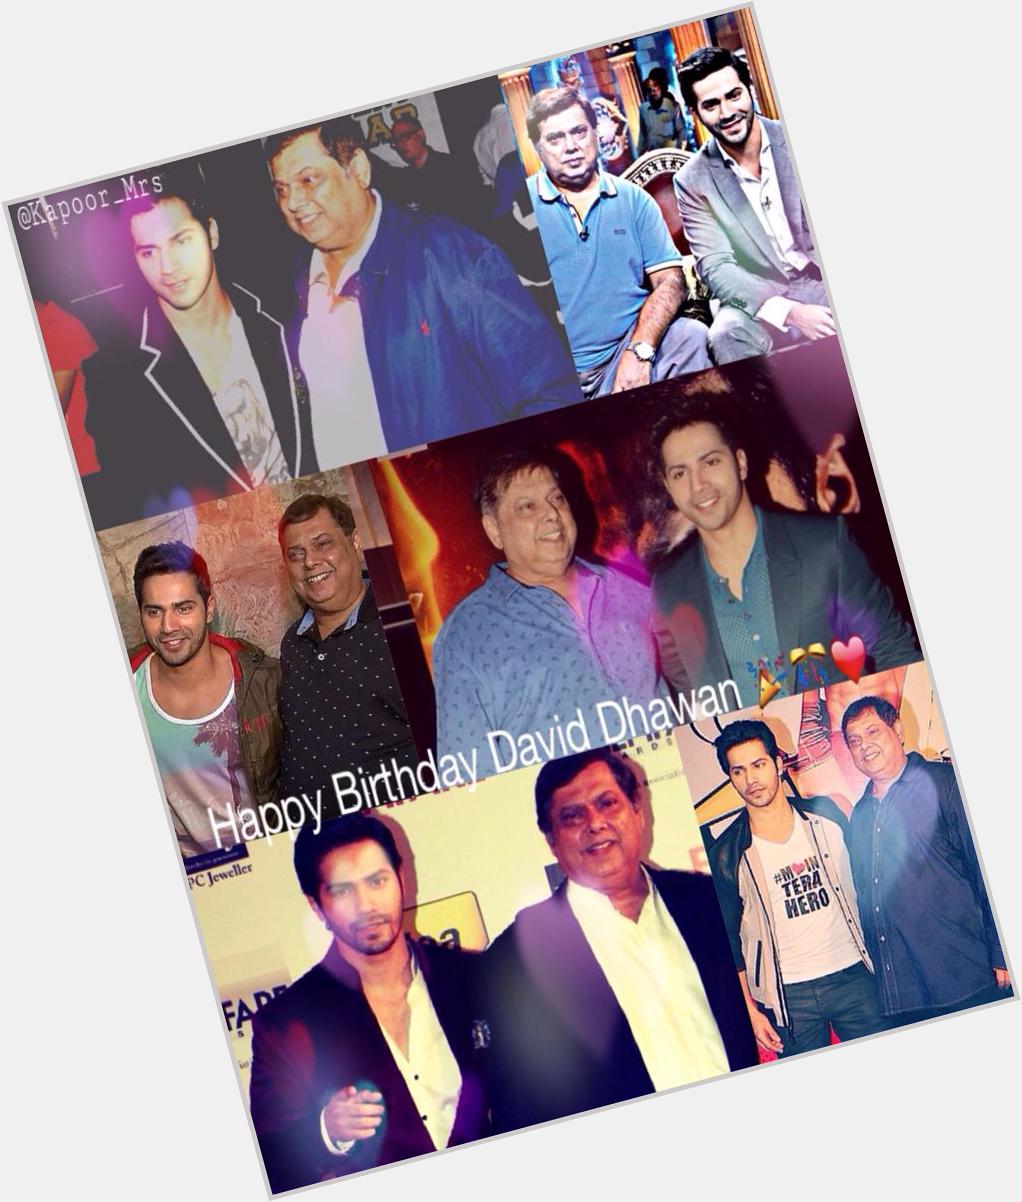 Happy Birthday David Dhawan and i wish you the best and god bless you and your family    Ly my hero  